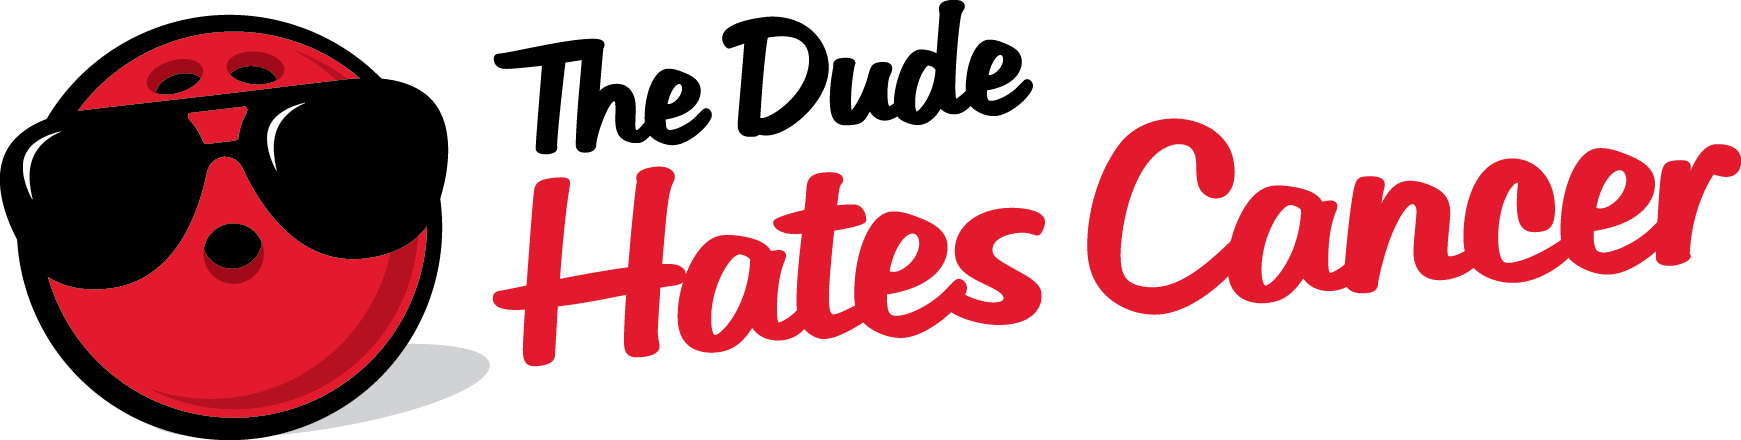 The Dude Hates Cancer Bowling Ball Logo